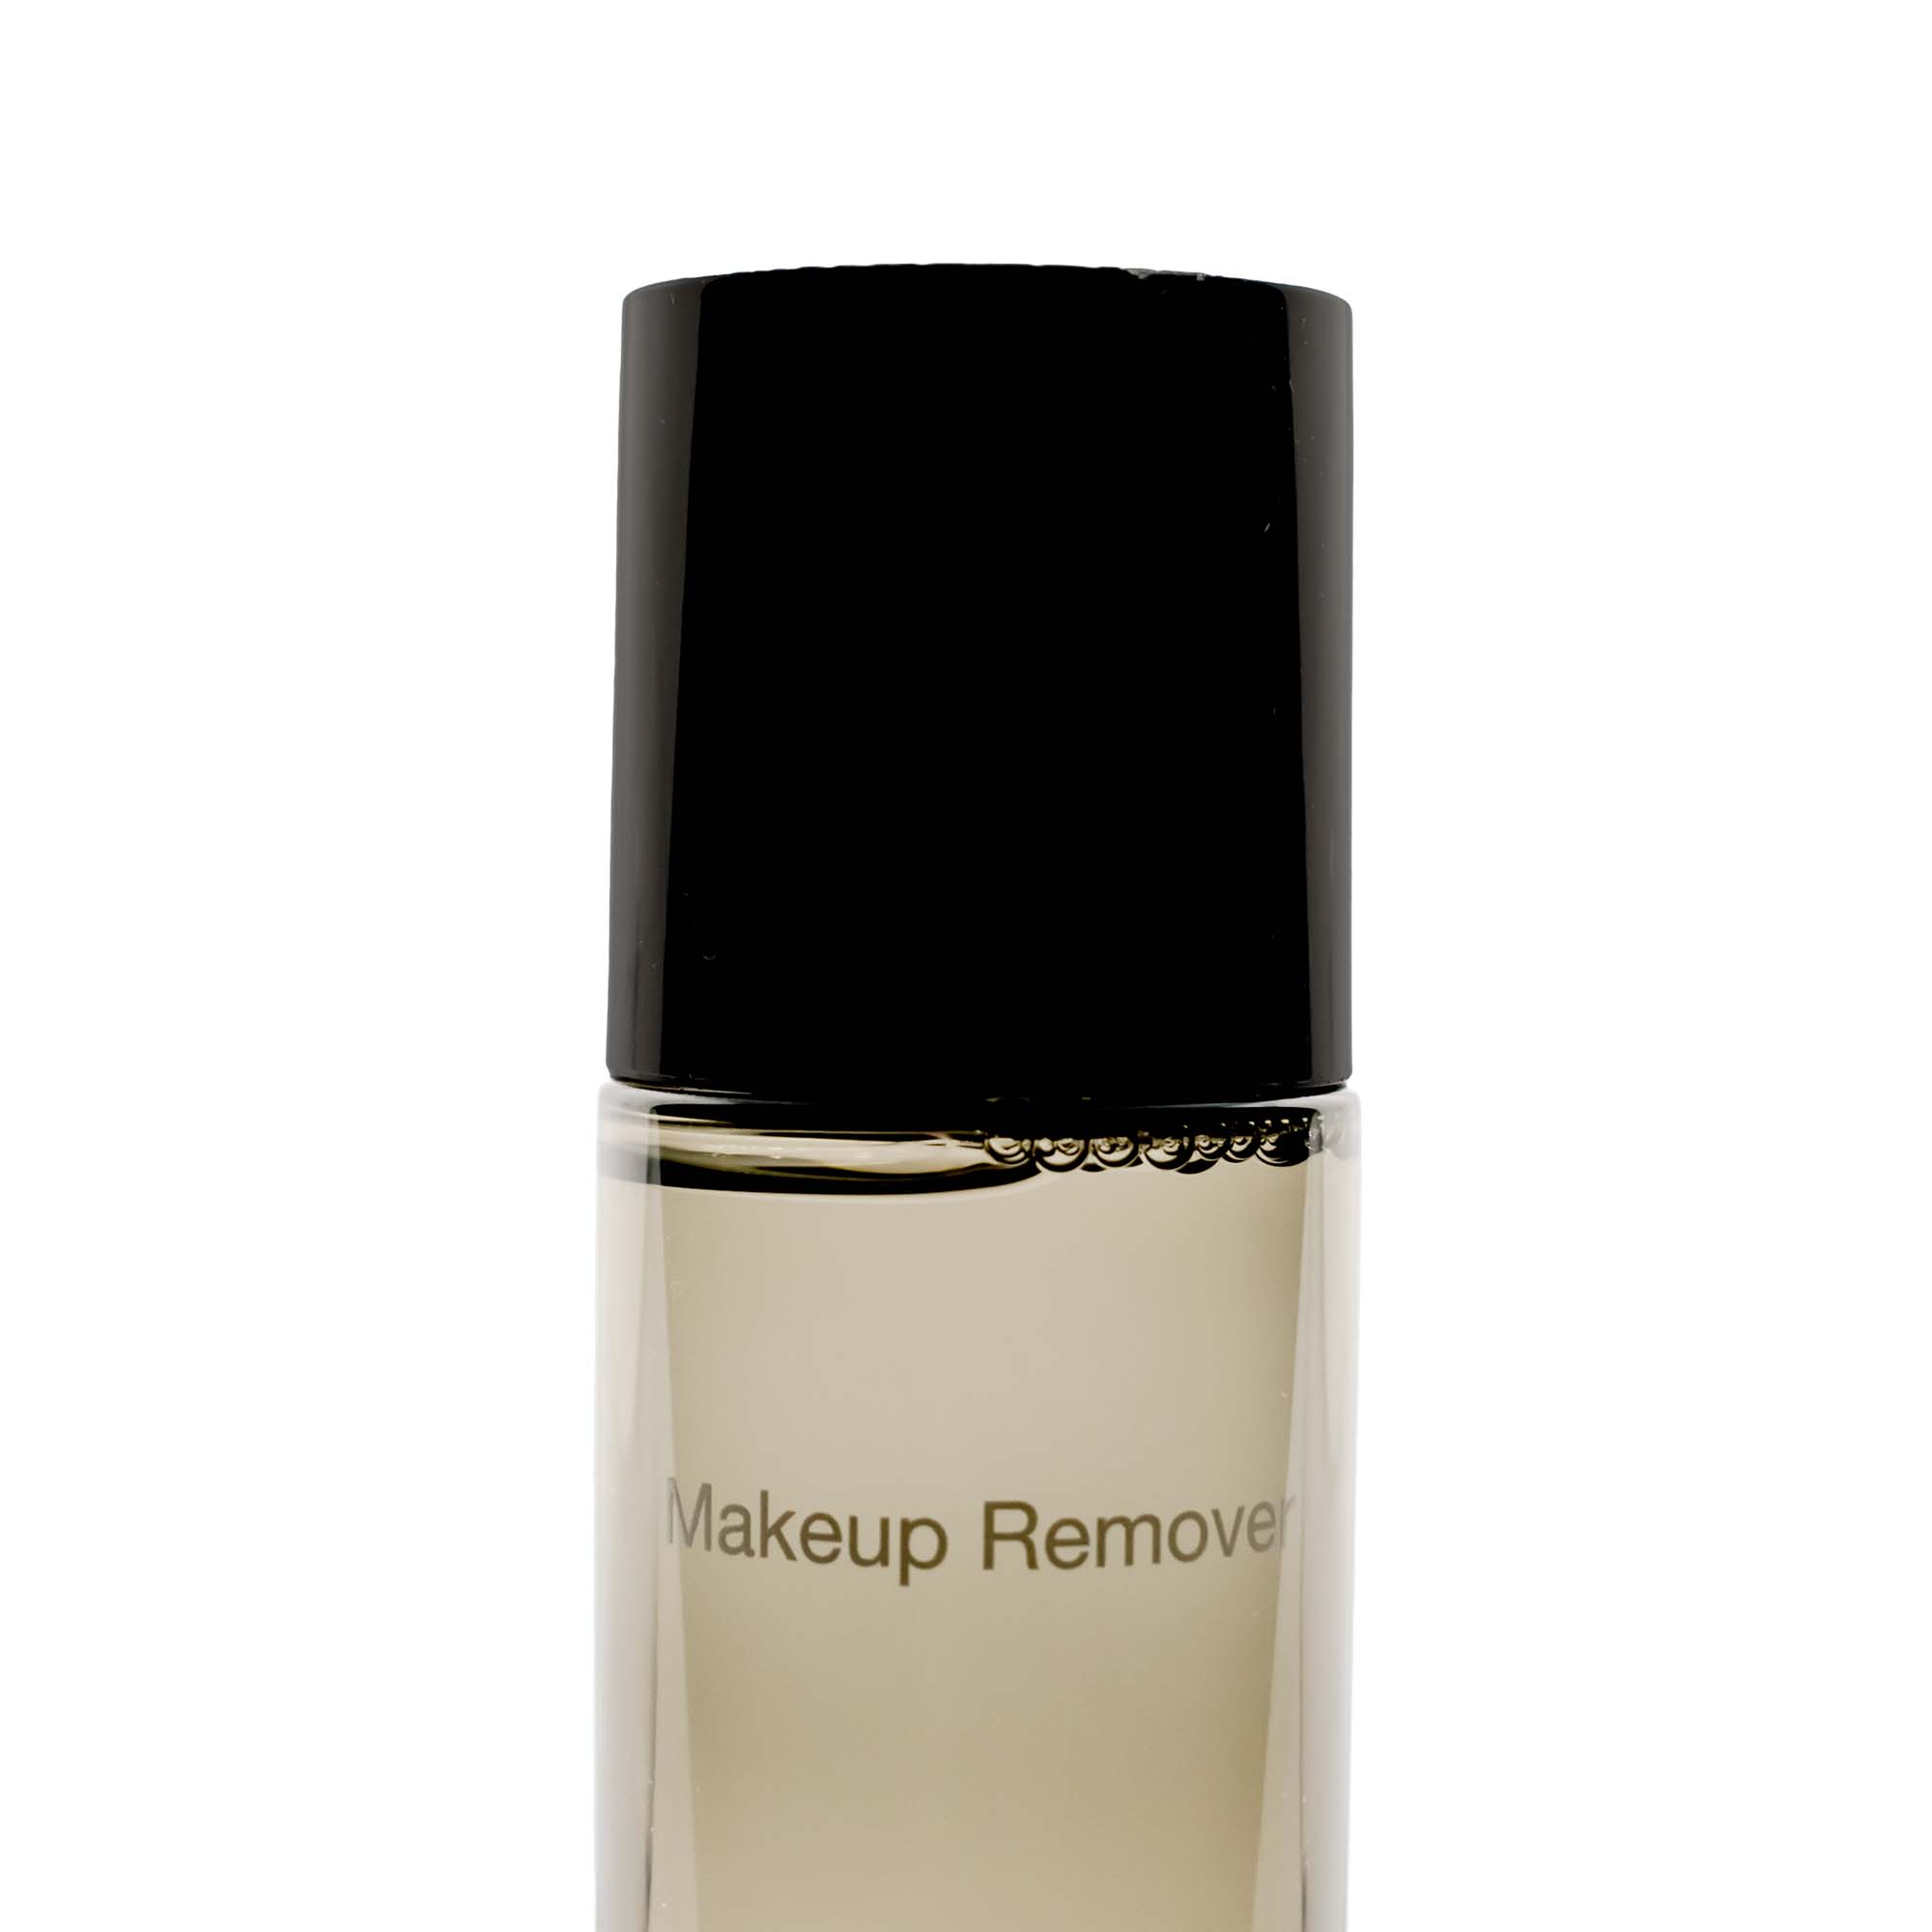 Makeup Remover Solution - Whitelabeauty